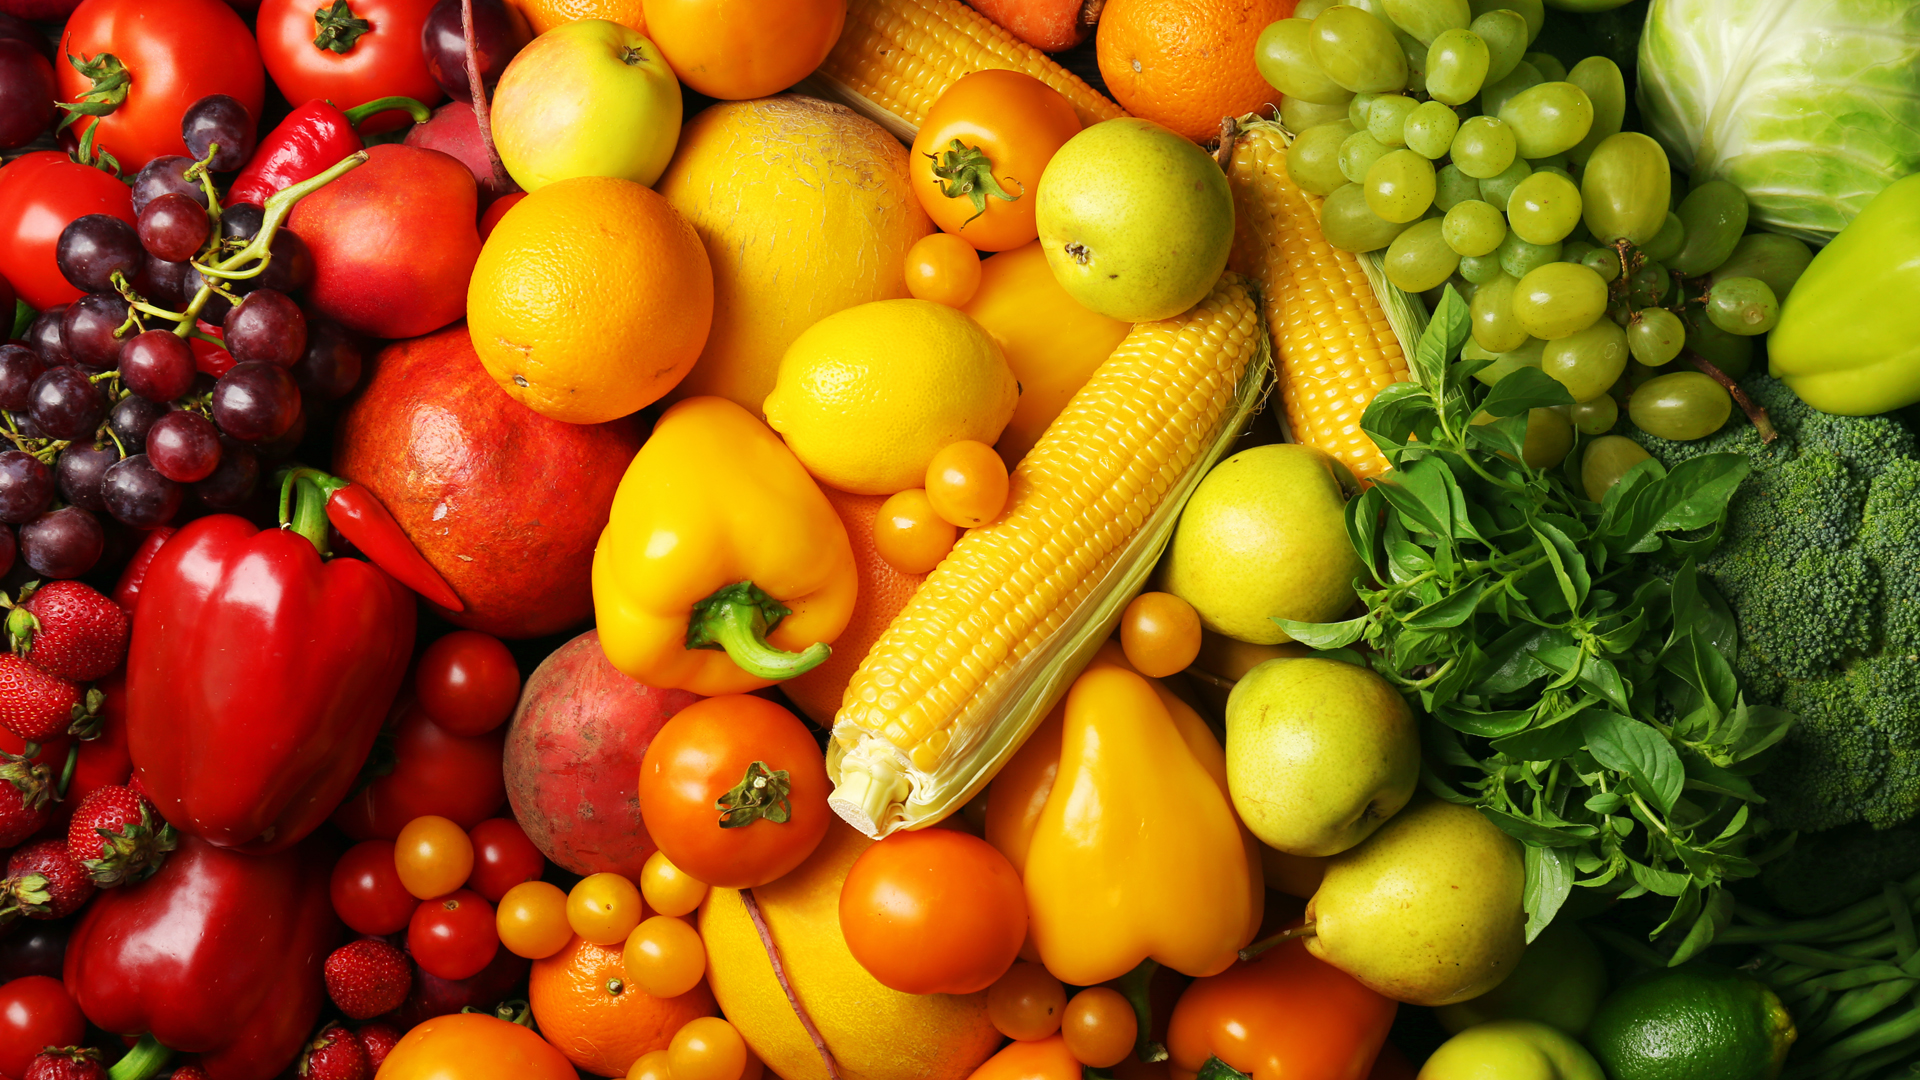 A colourful selection of fruit and vegetables